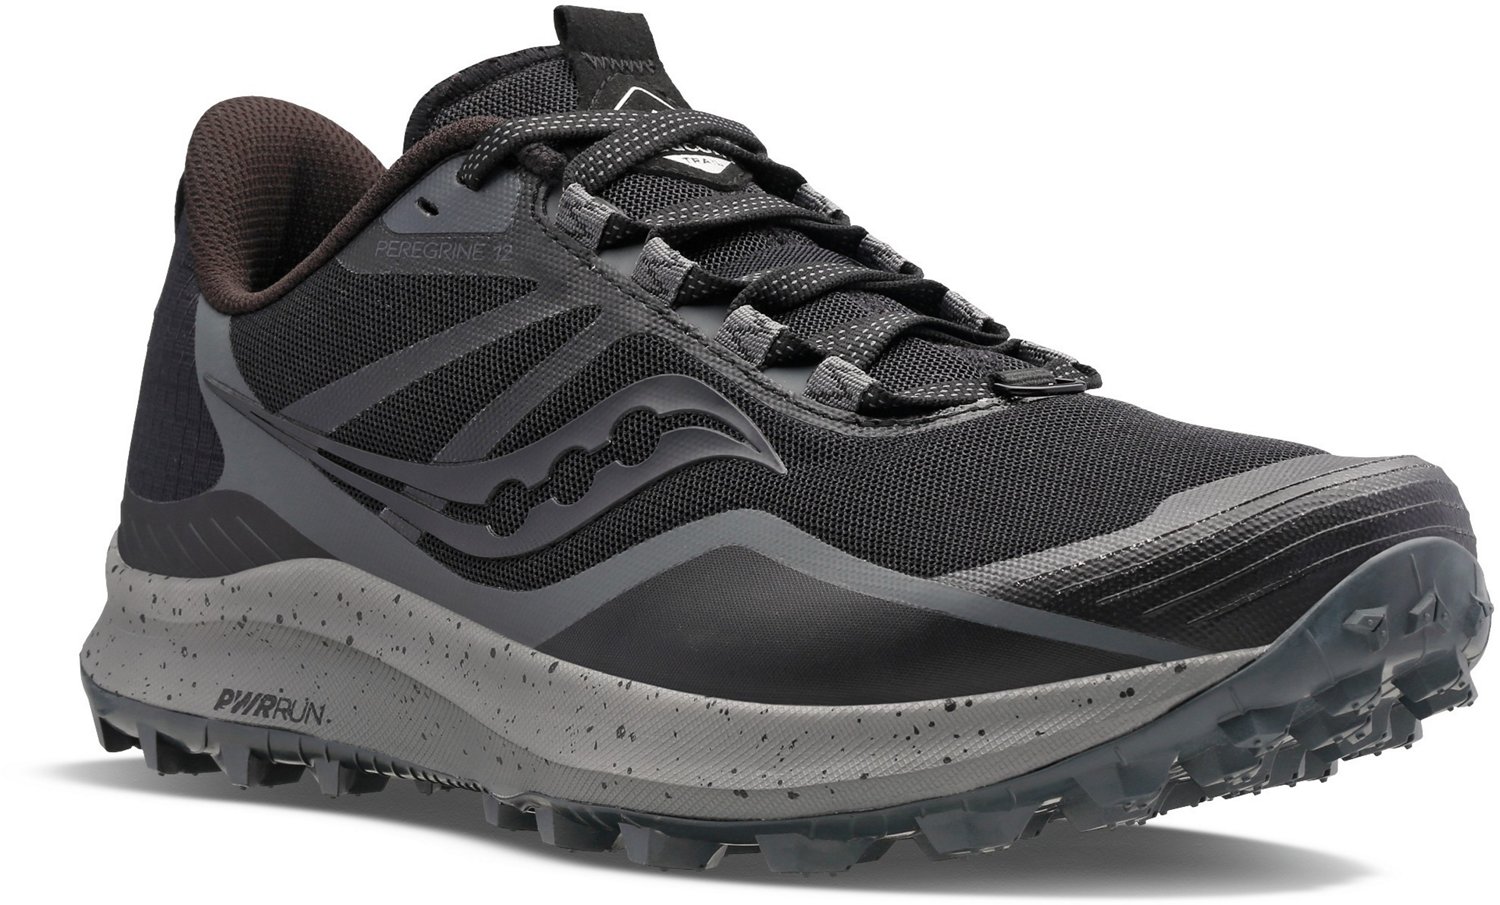 Saucony Men's Peregrine 12 Trail Shoes | Free Shipping at Academy